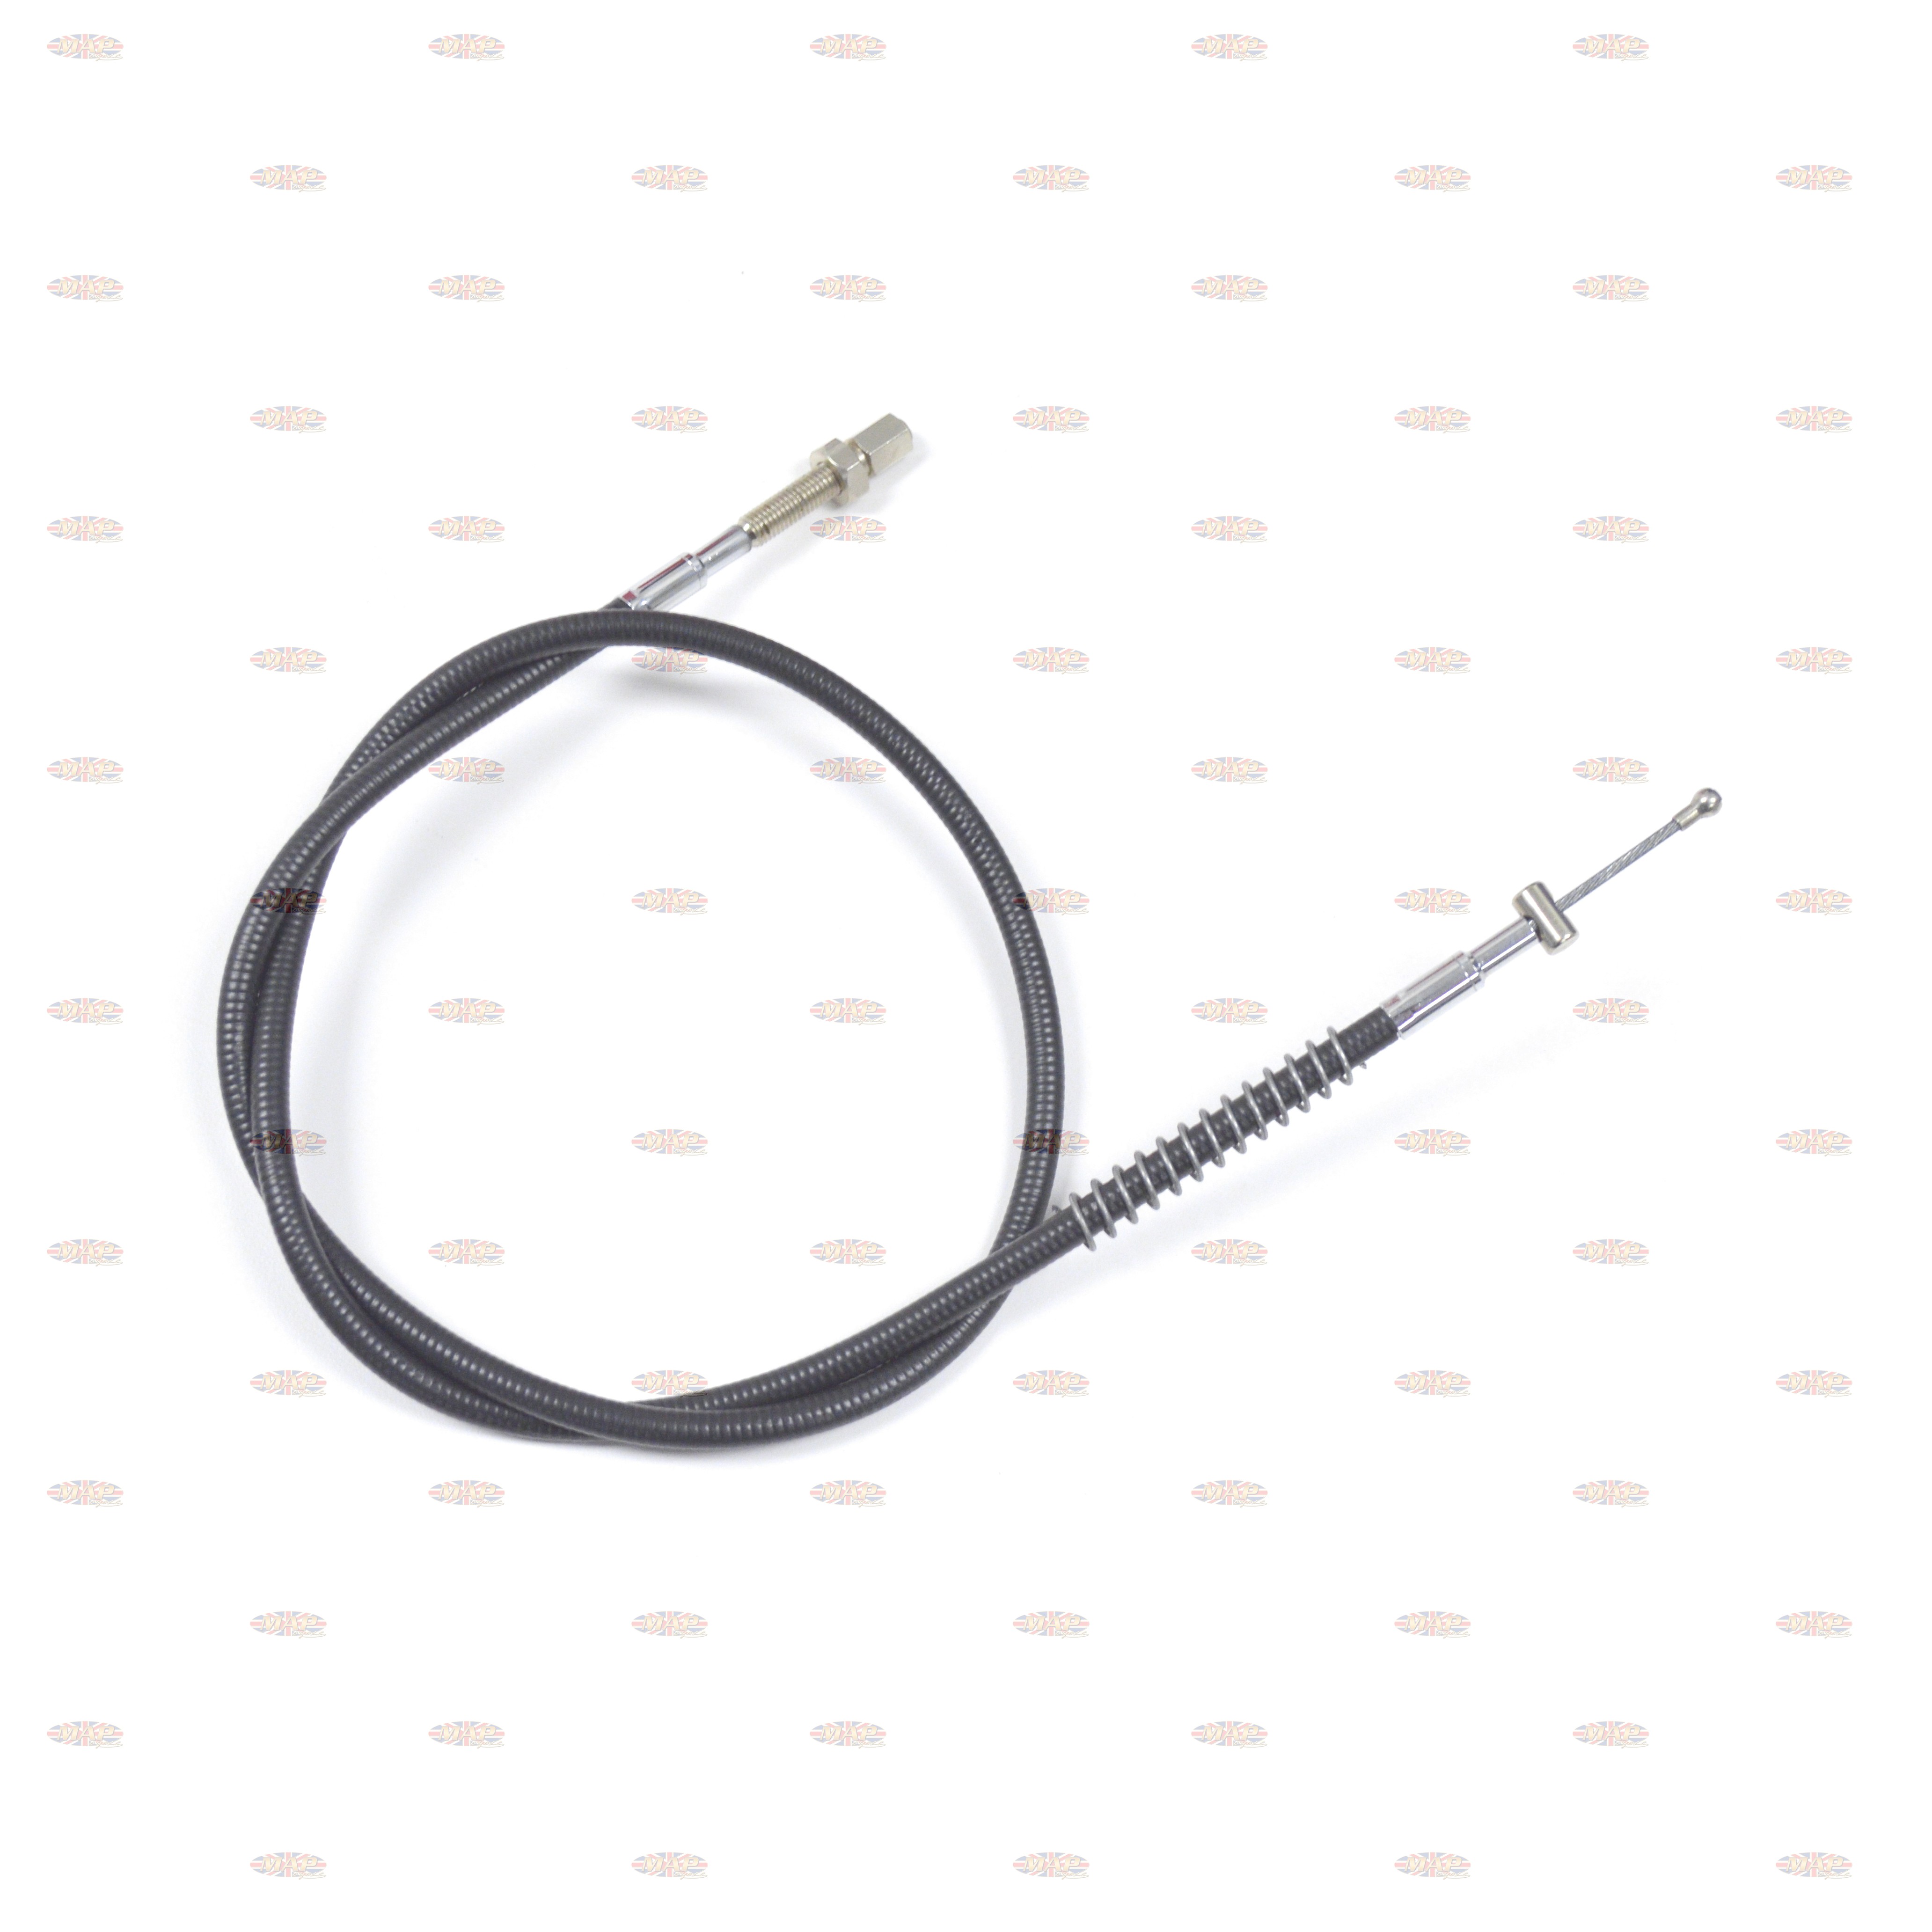 BSA Victor 441 - B44  - Compression Release Cable  41-8548